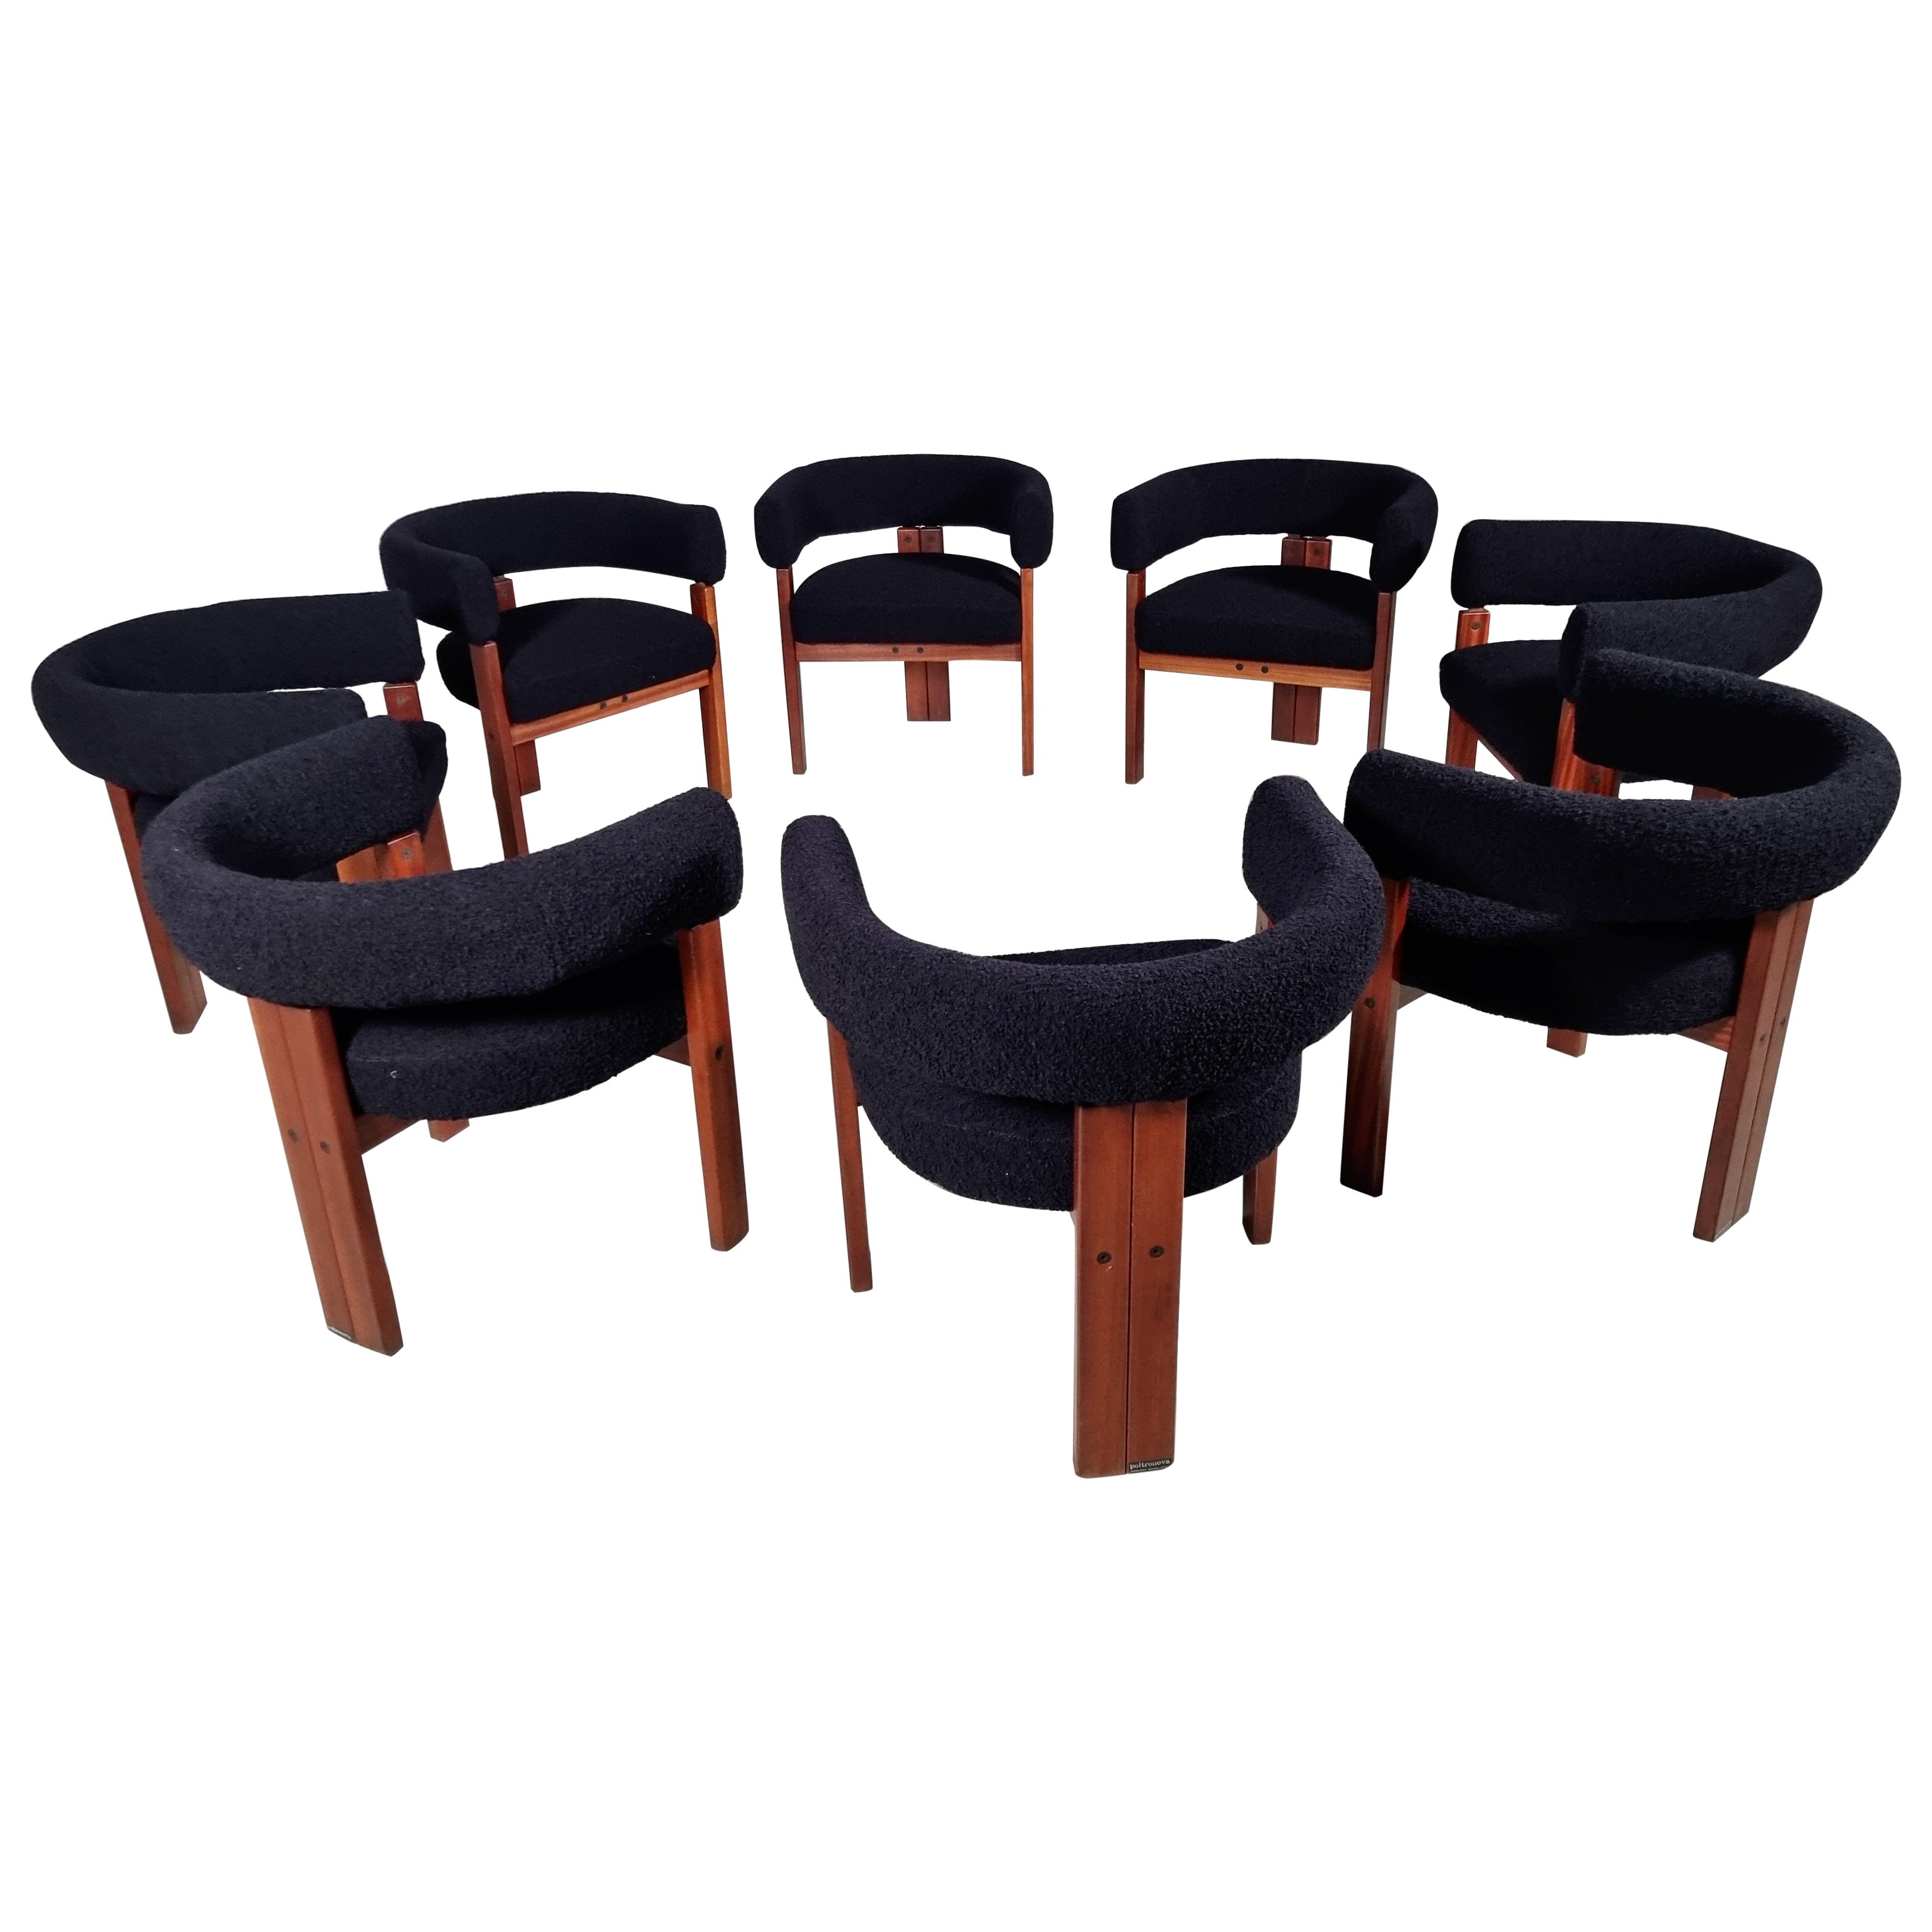 Set of 8 Chairs in teak and black boucle by Ettore Sottsass for Poltronova, 1960